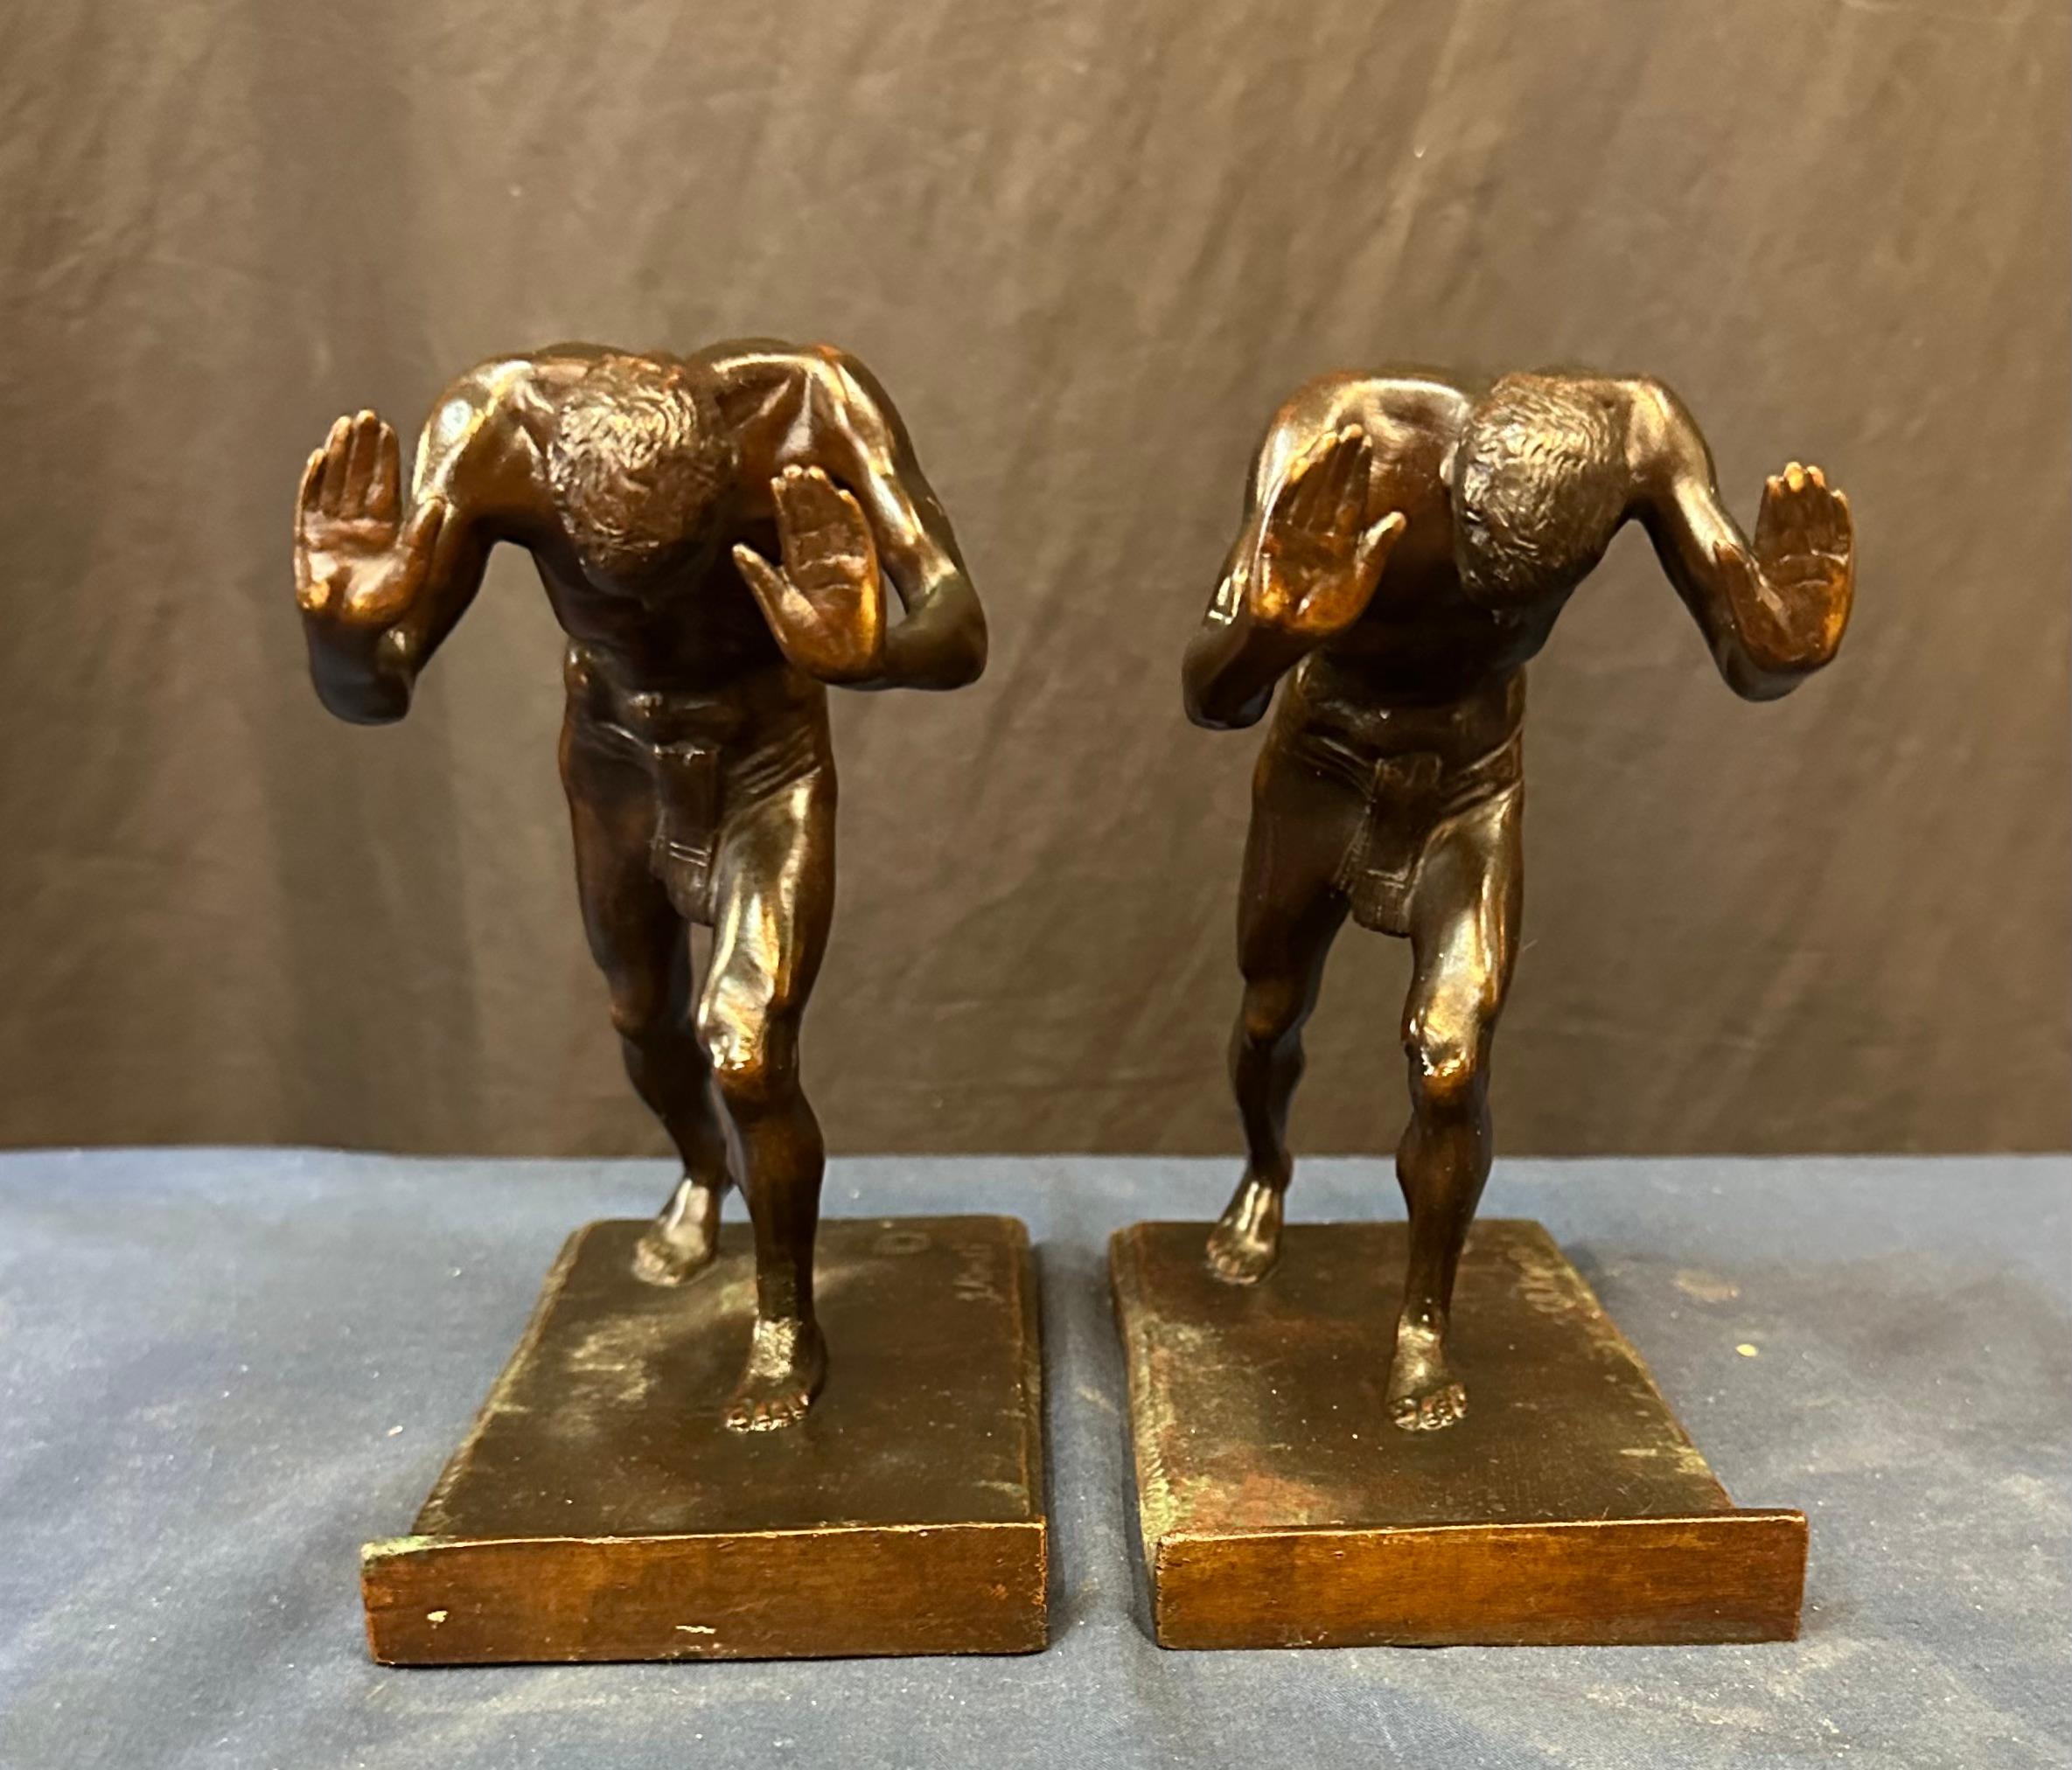 Austrian Pushing Men, A Pair of Bookends For Sale